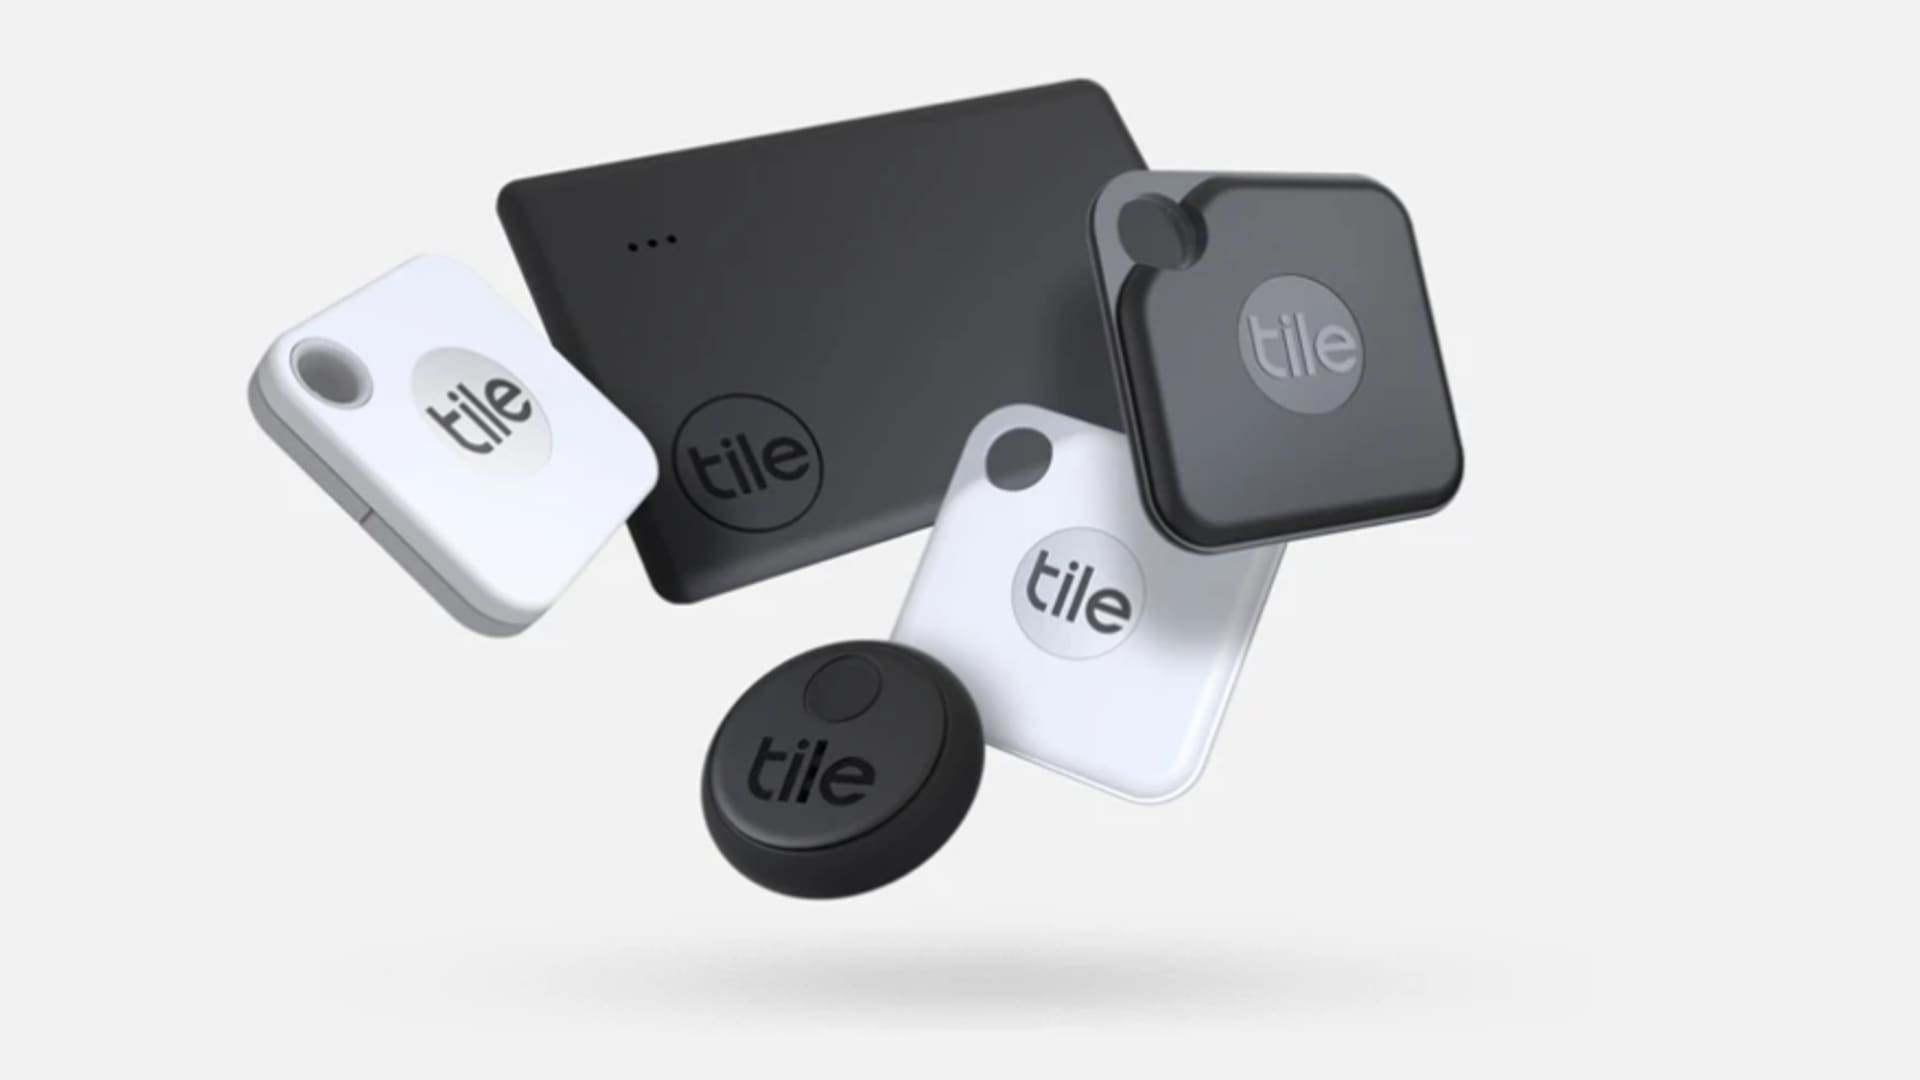 Bluetooth tracker Tile has new approach for stopping thieves, stalkers